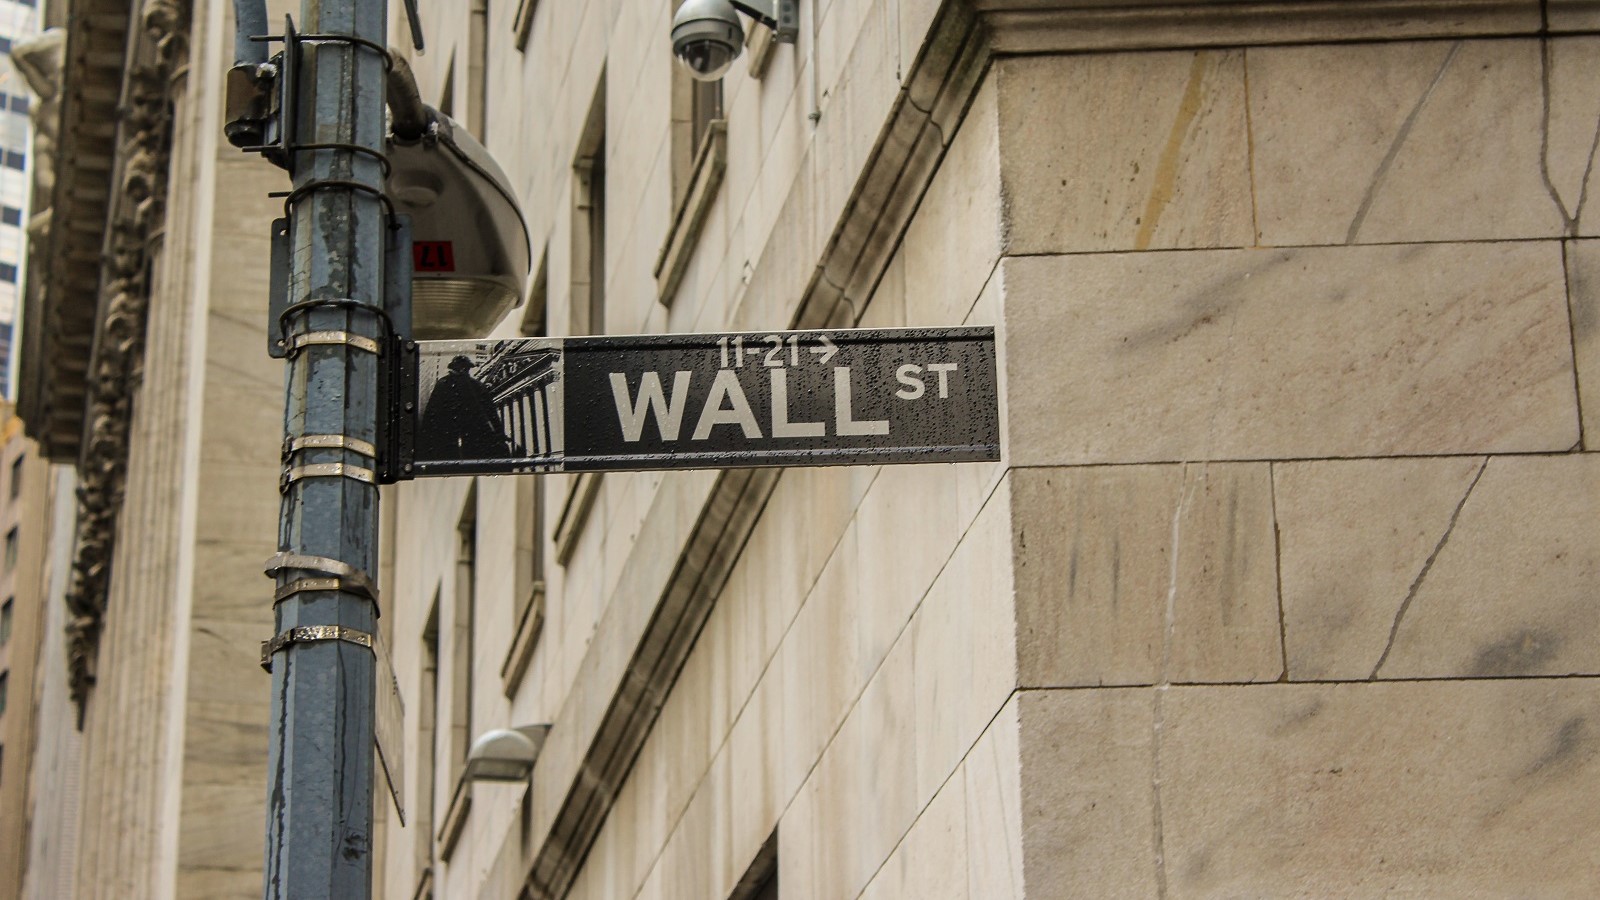 Street sign of Wall Street on a pole by a tan stone building